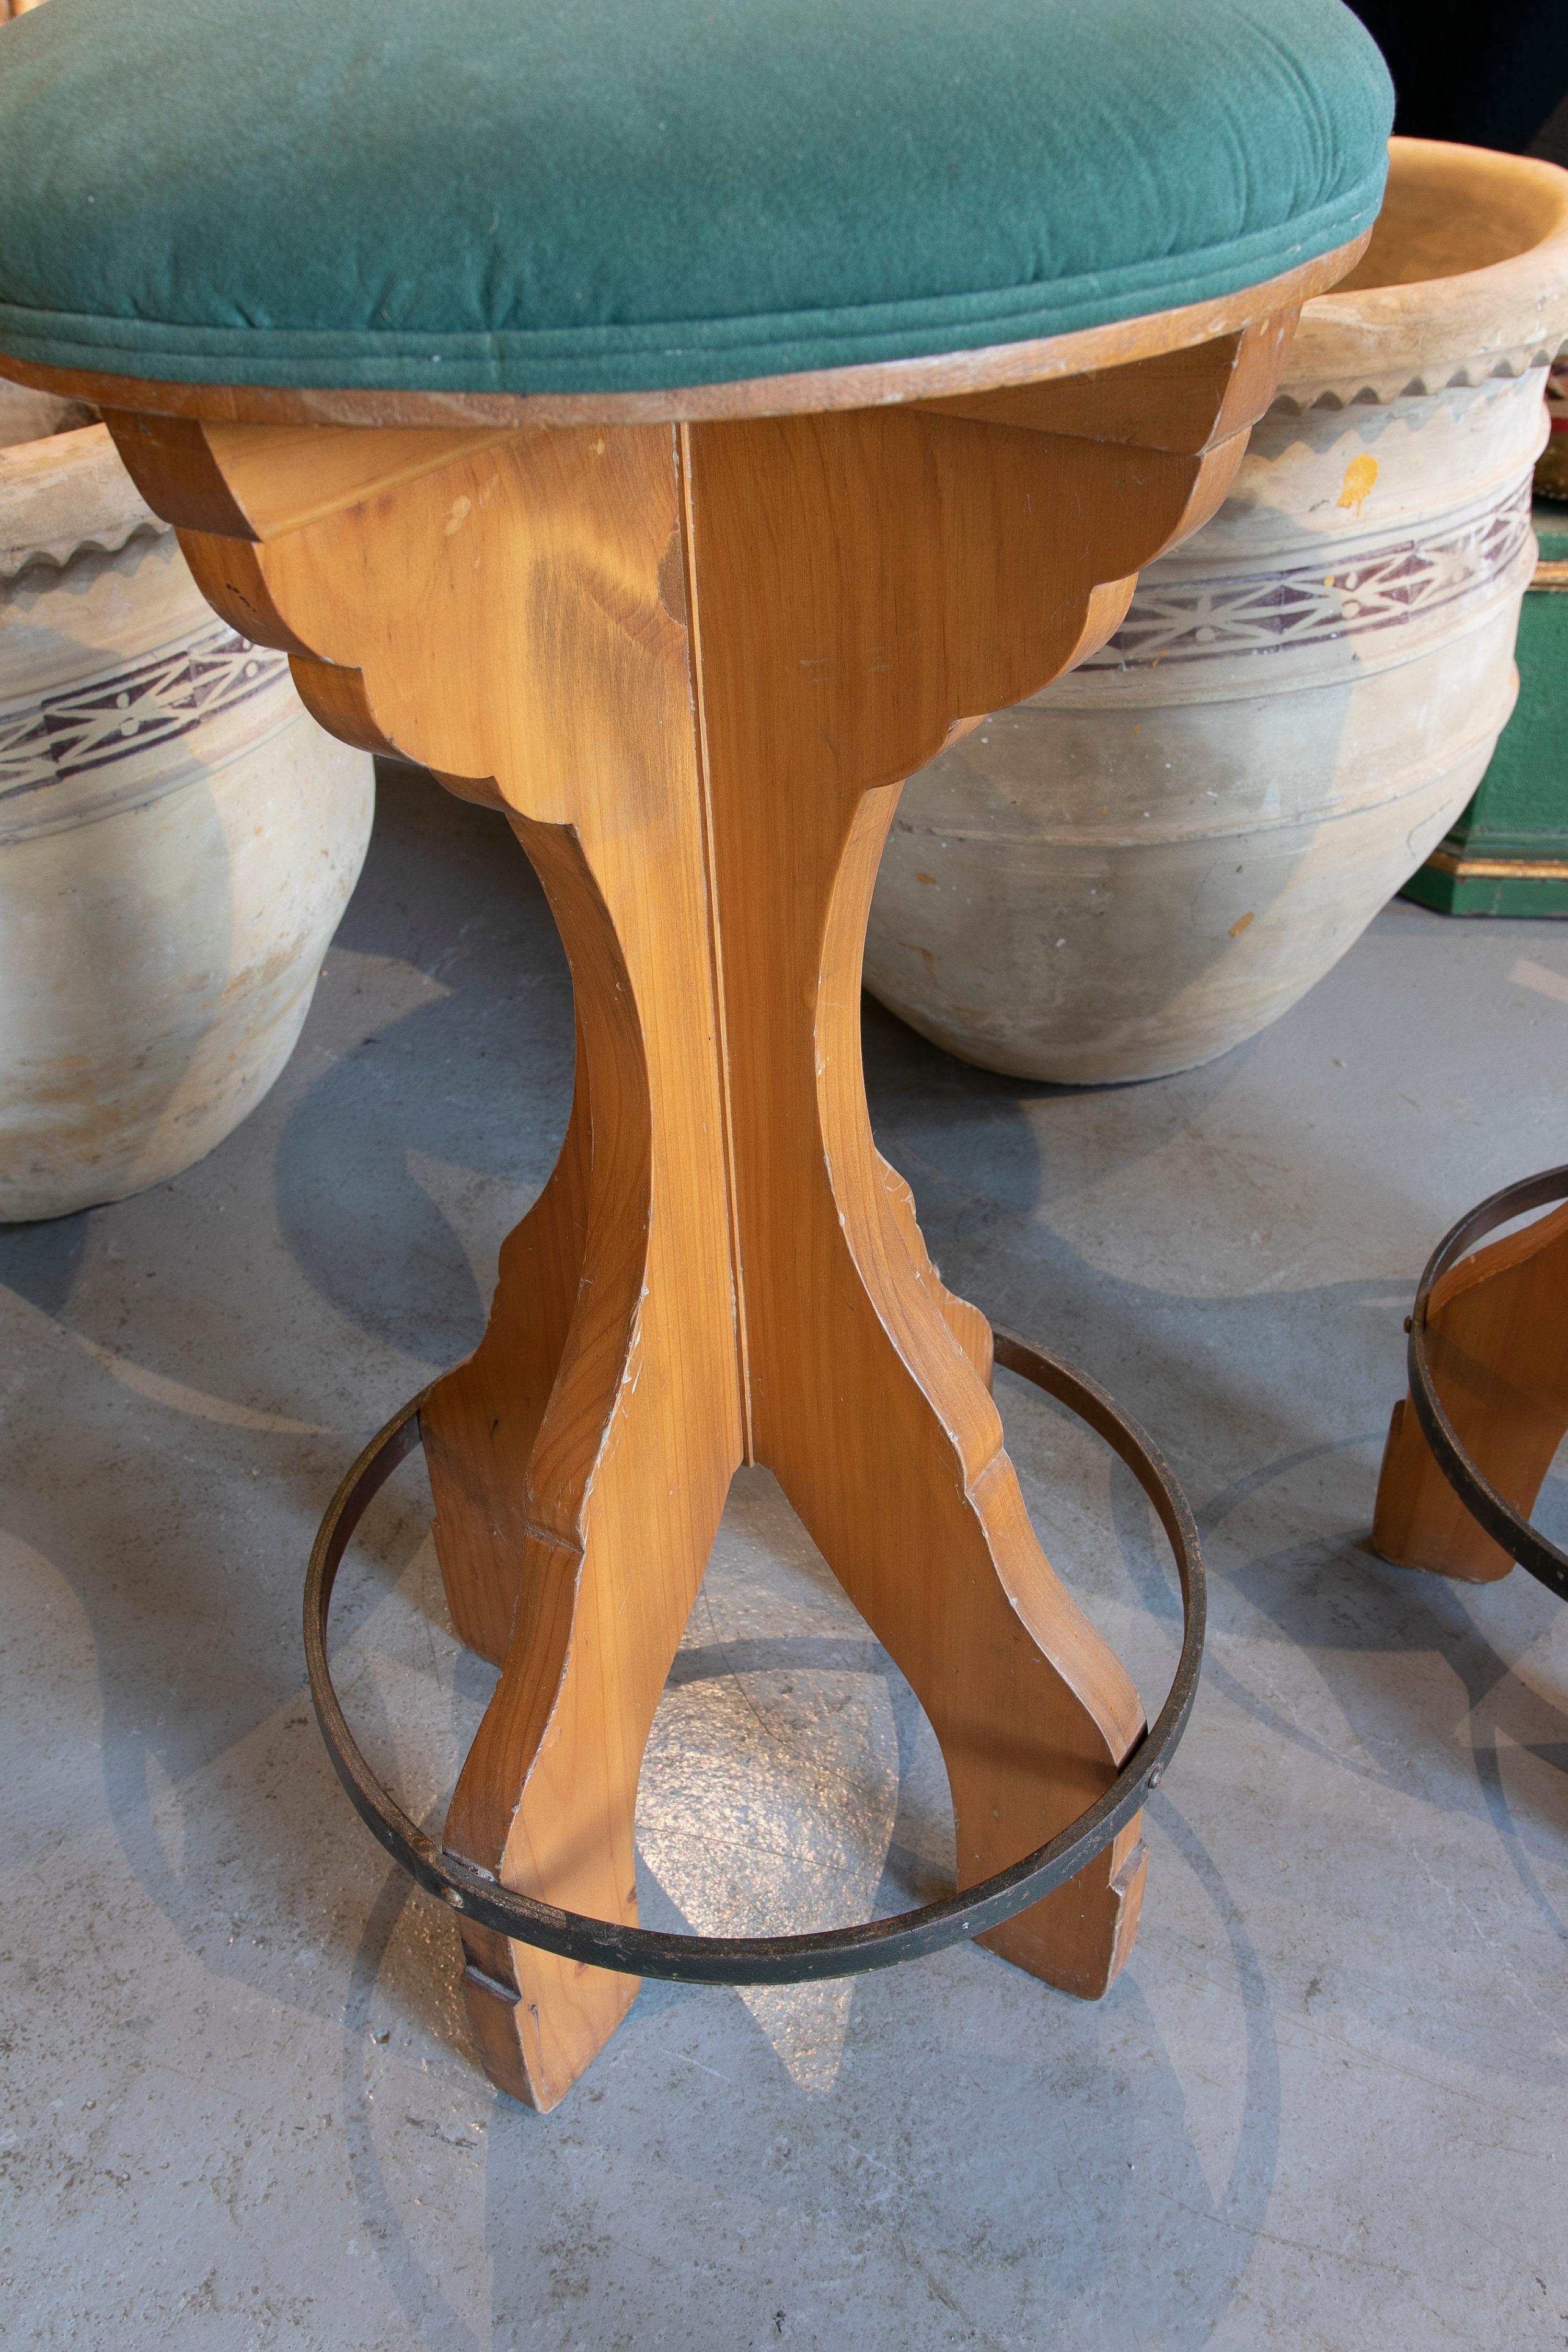 Pair of 1980s Spanish Wooden Stools with Teal Upholstered Seats For Sale 3